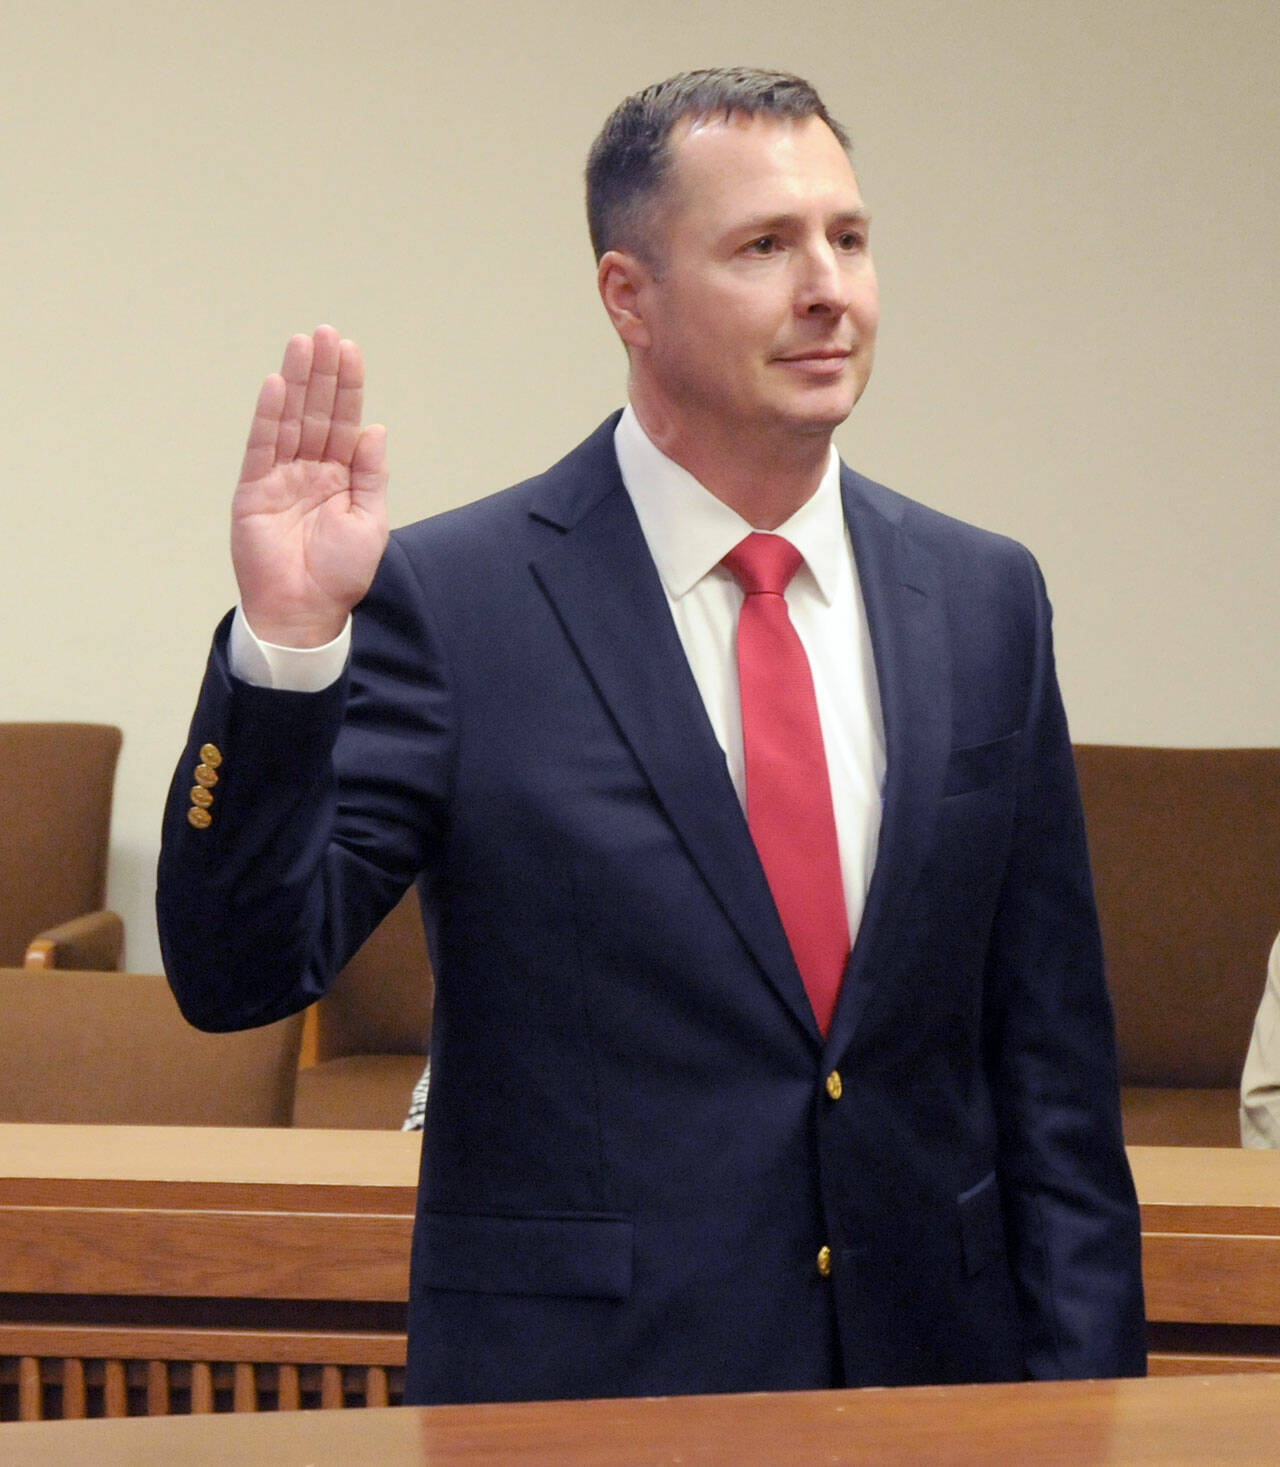 Clallam County Prosecuting Attorney Mark Nichols is sworn in on Wednesday after being reelected to the office. (Keith Thorpe/Peninsula Daily News)